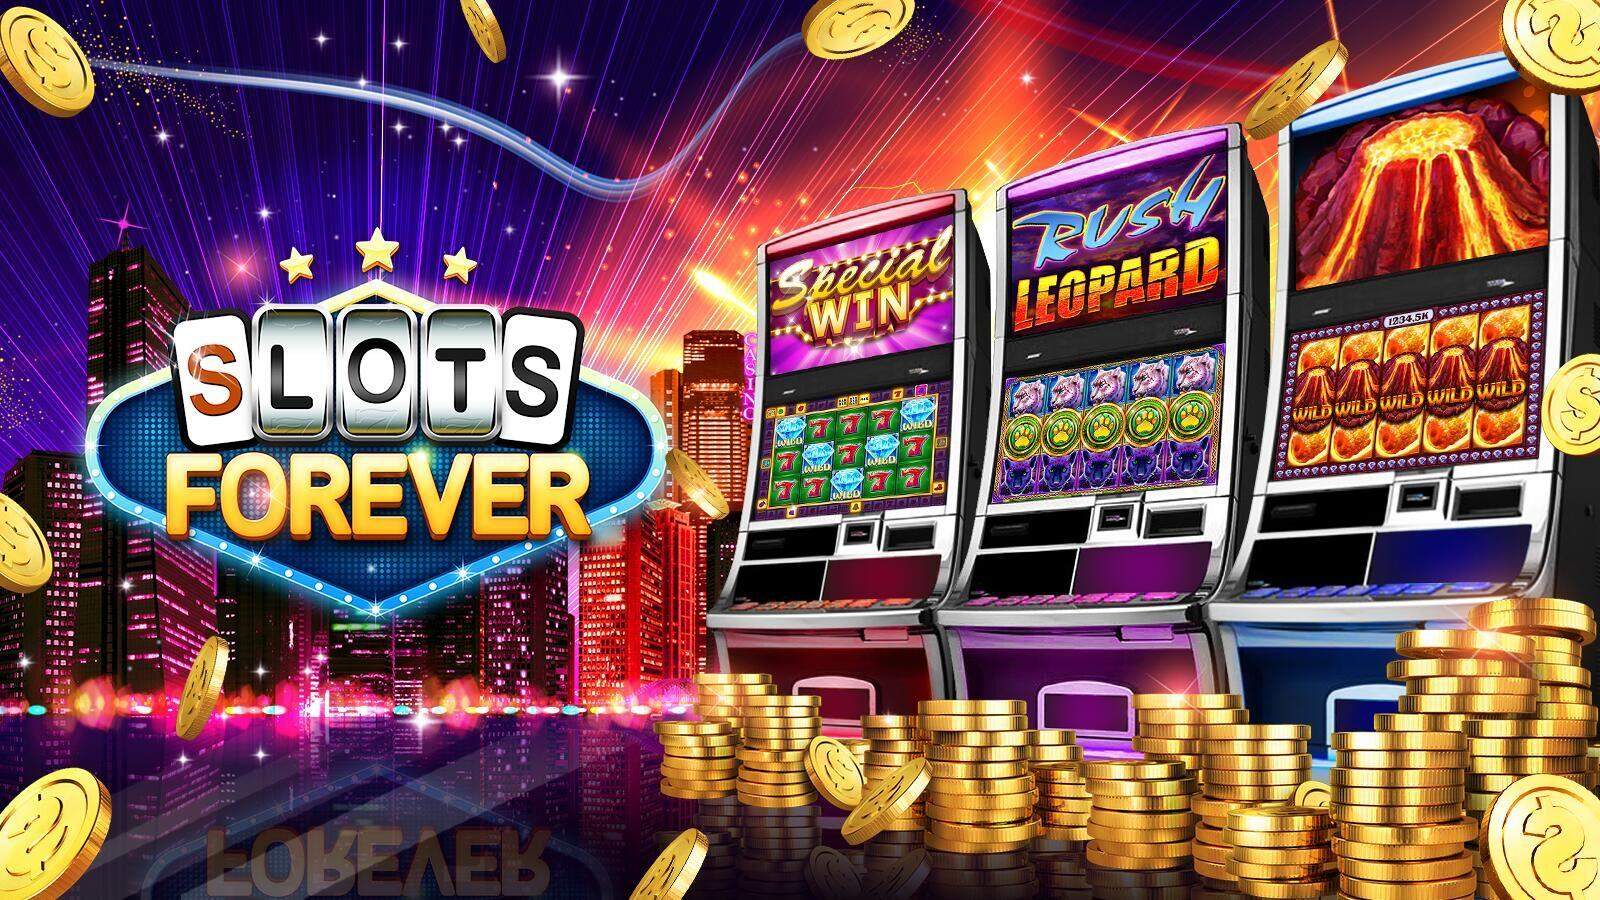 Ancient Legends, with Online Slots